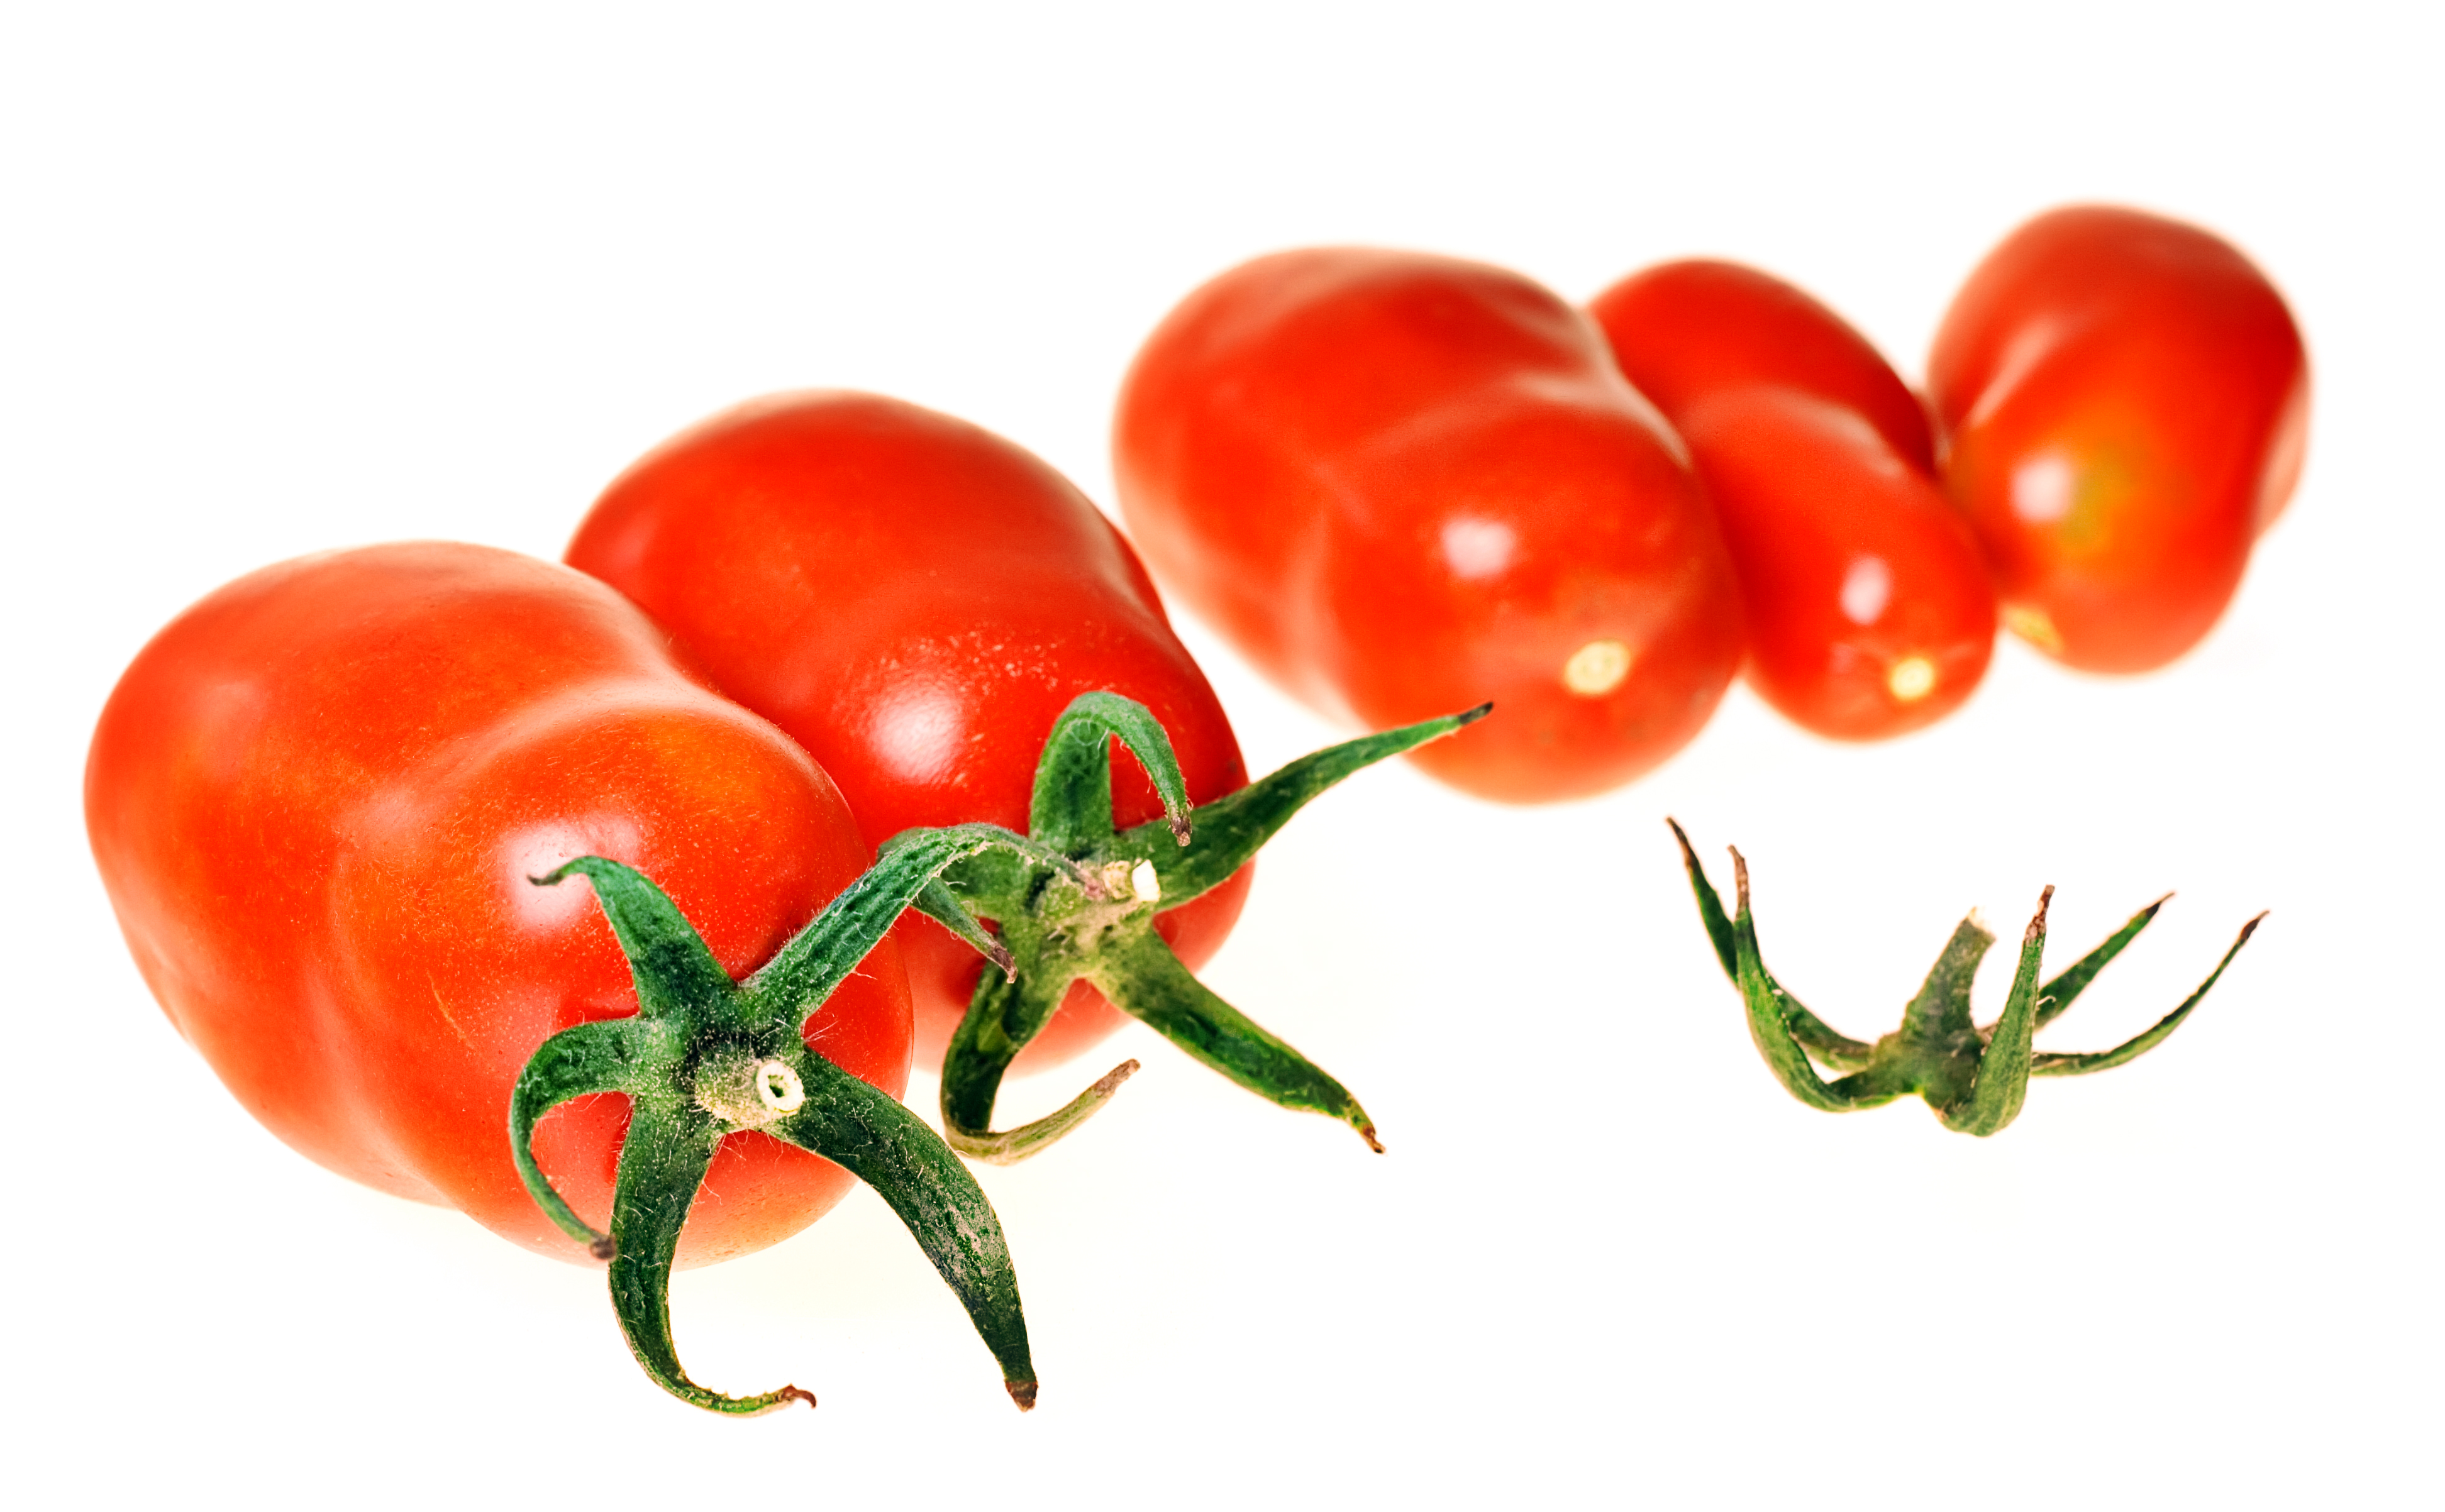 Tomatoes - healthy eating photo